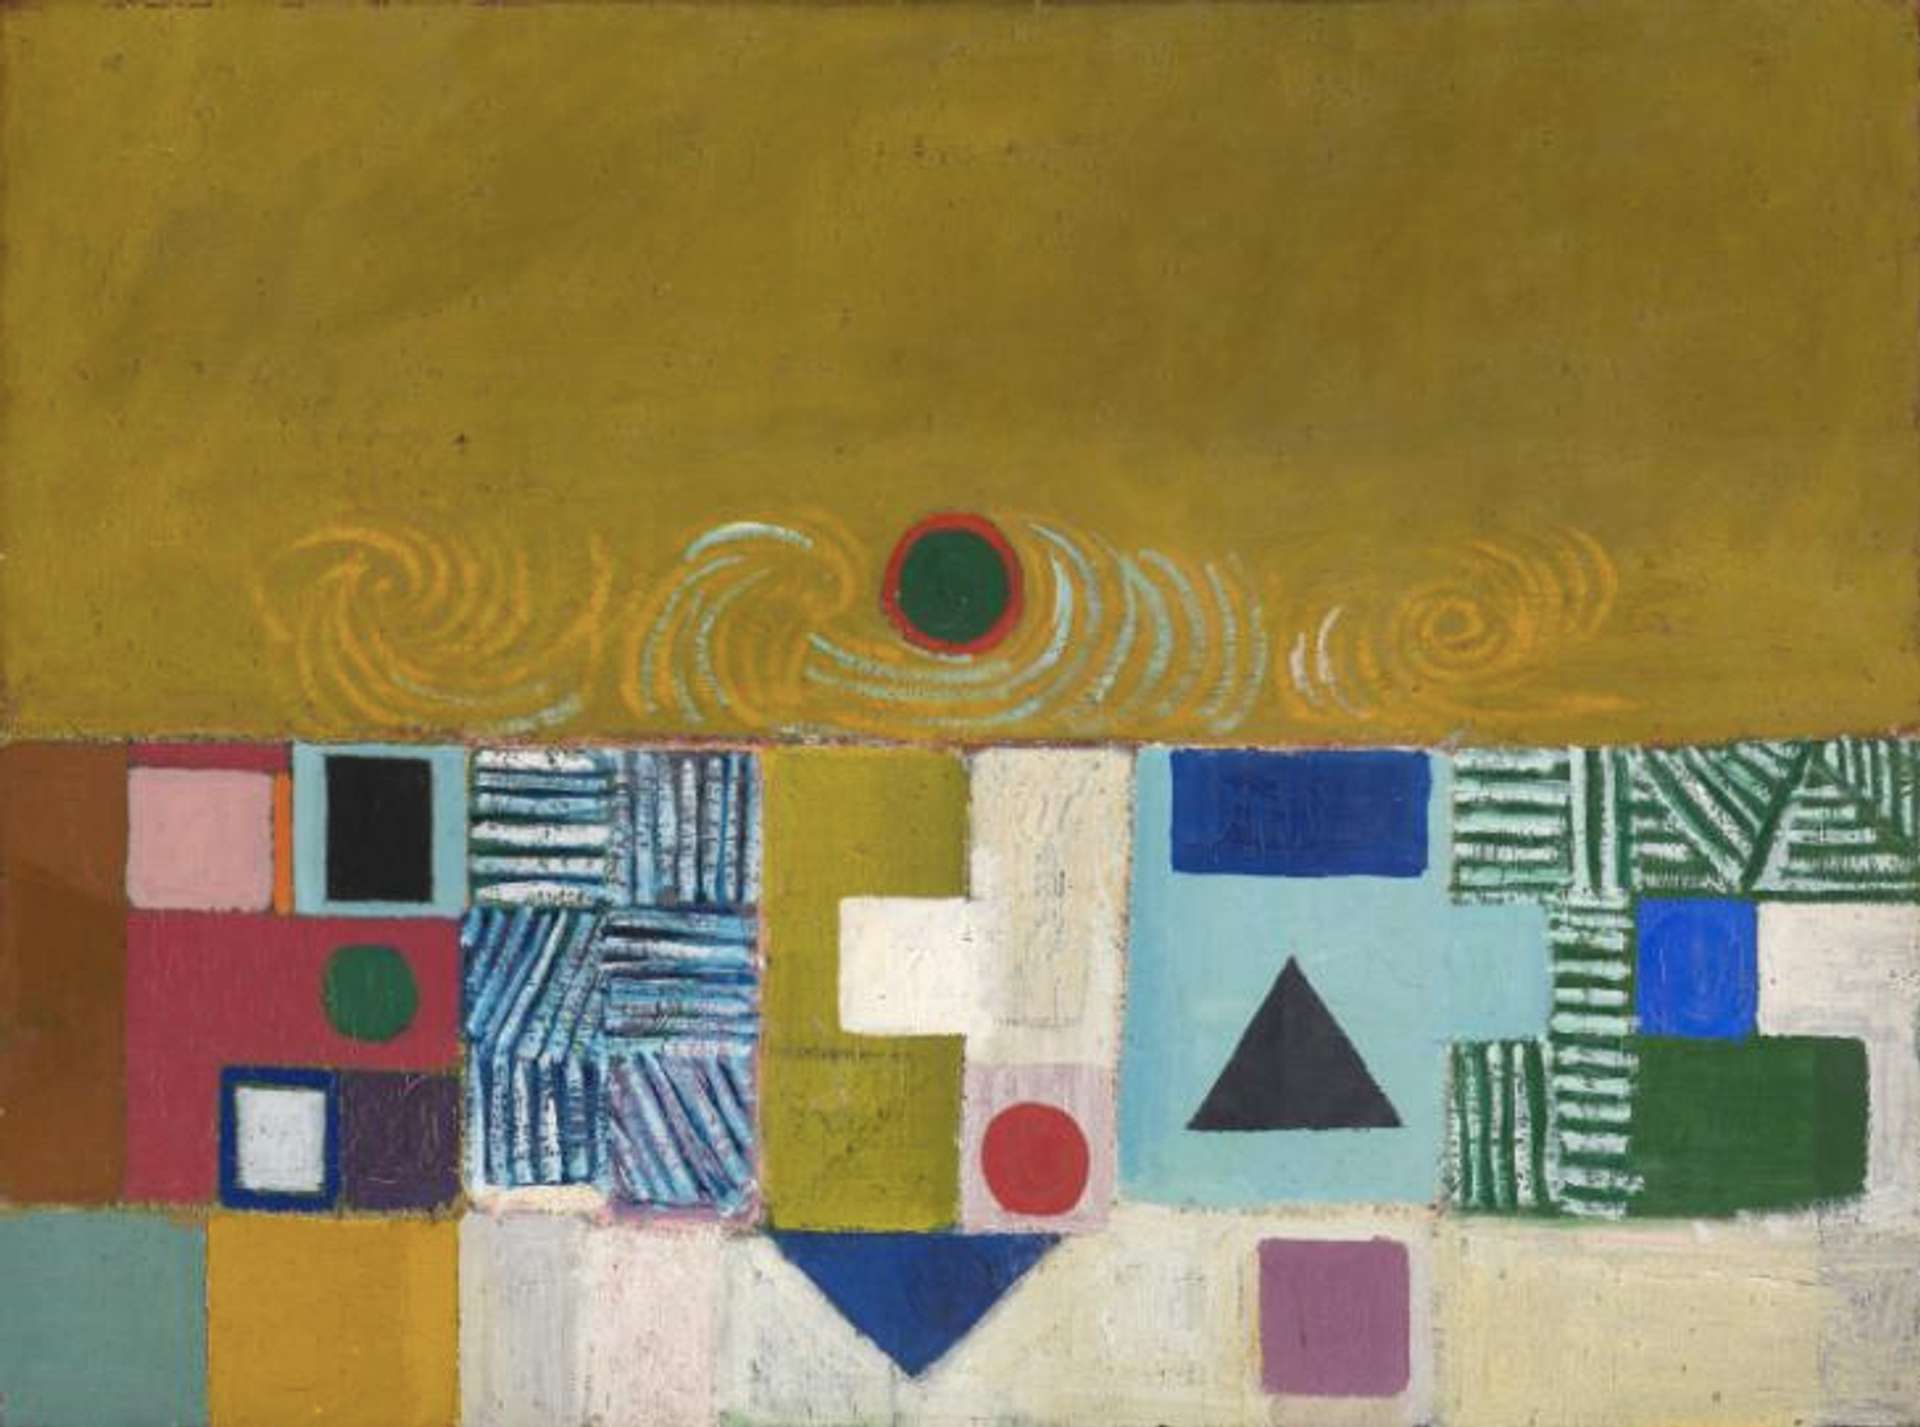 An abstract painting titled "Square Motif, Blue and Gold: The Eclipse" featuring a square shape in the center, divided into multiple geometric sections in shades of blue and gold, surrounded by a white background and smaller squares in a pattern around the central square.